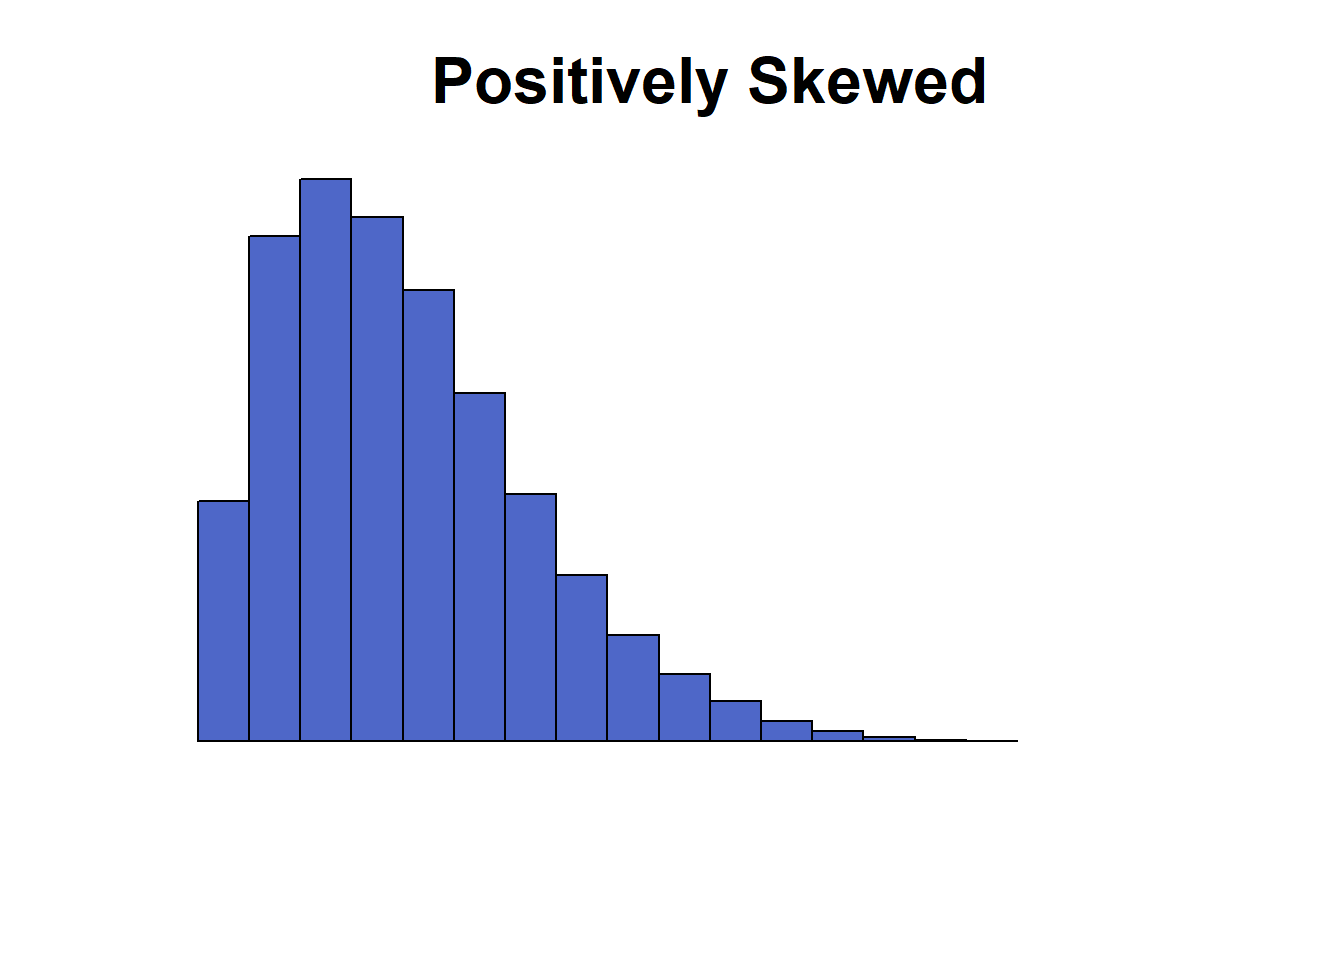 Histograms showing negatively skewed, symmetrical, and positively skewed distributions.